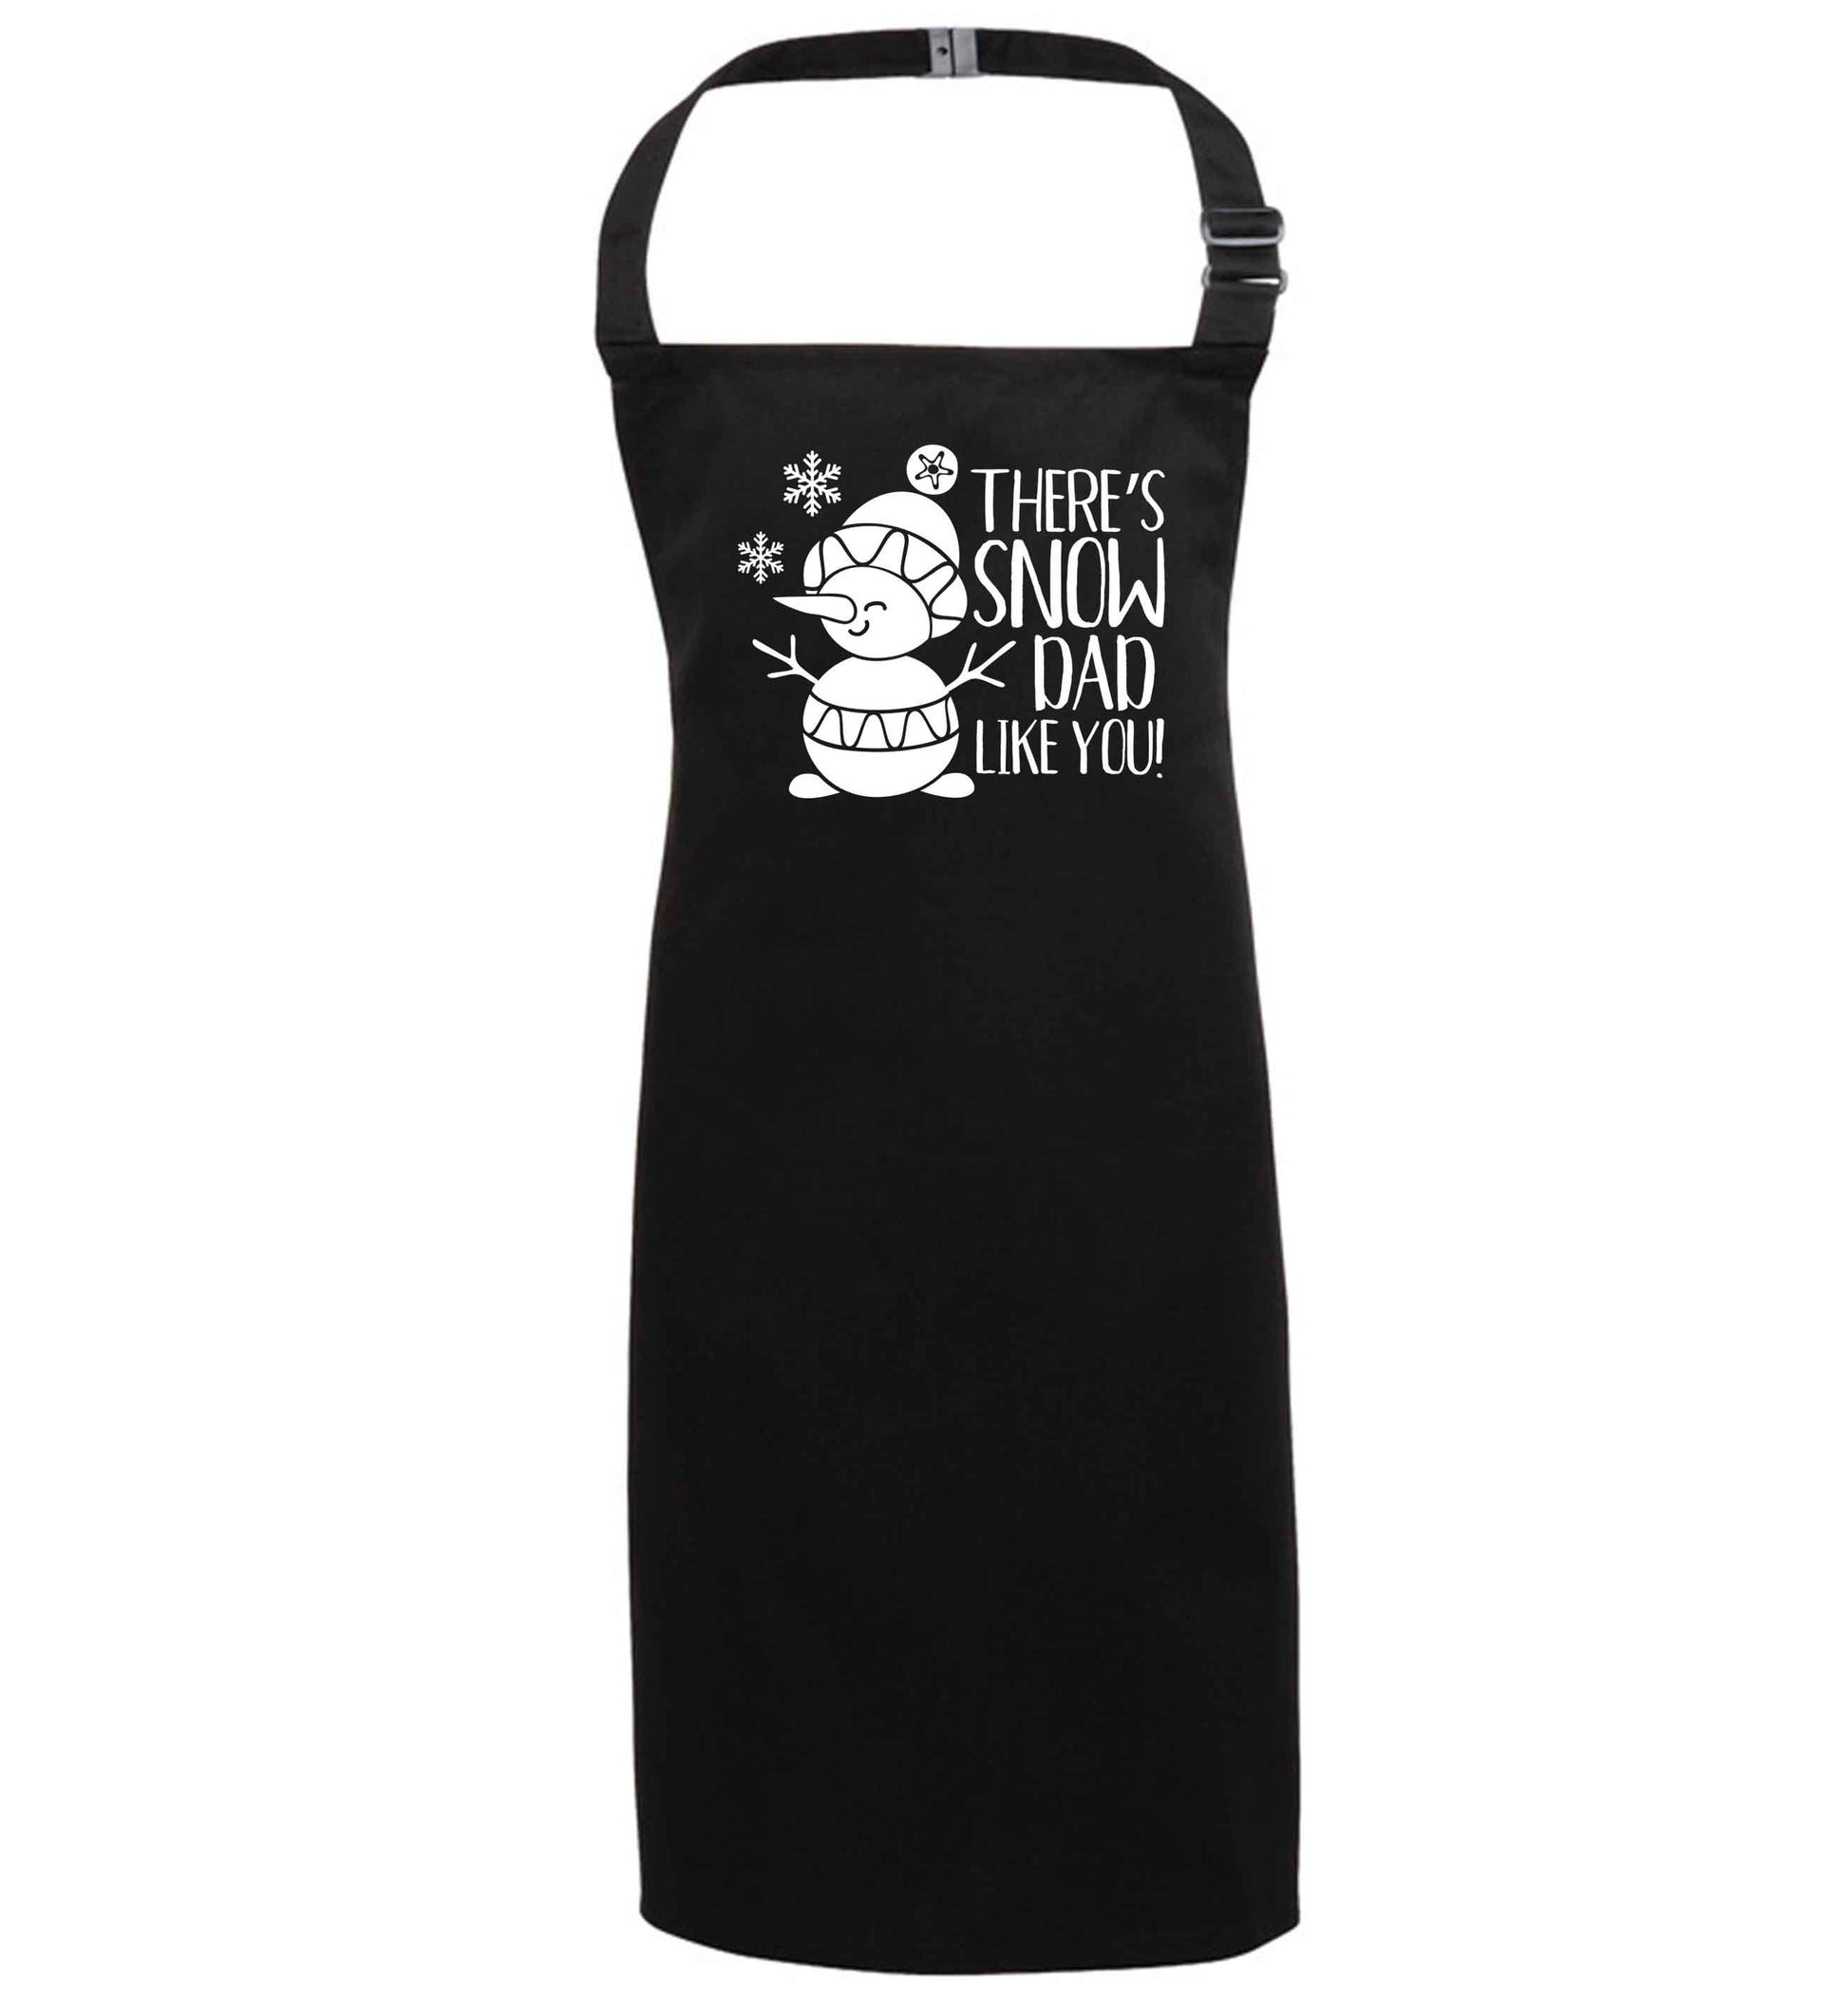 There's snow dad like you black apron 7-10 years